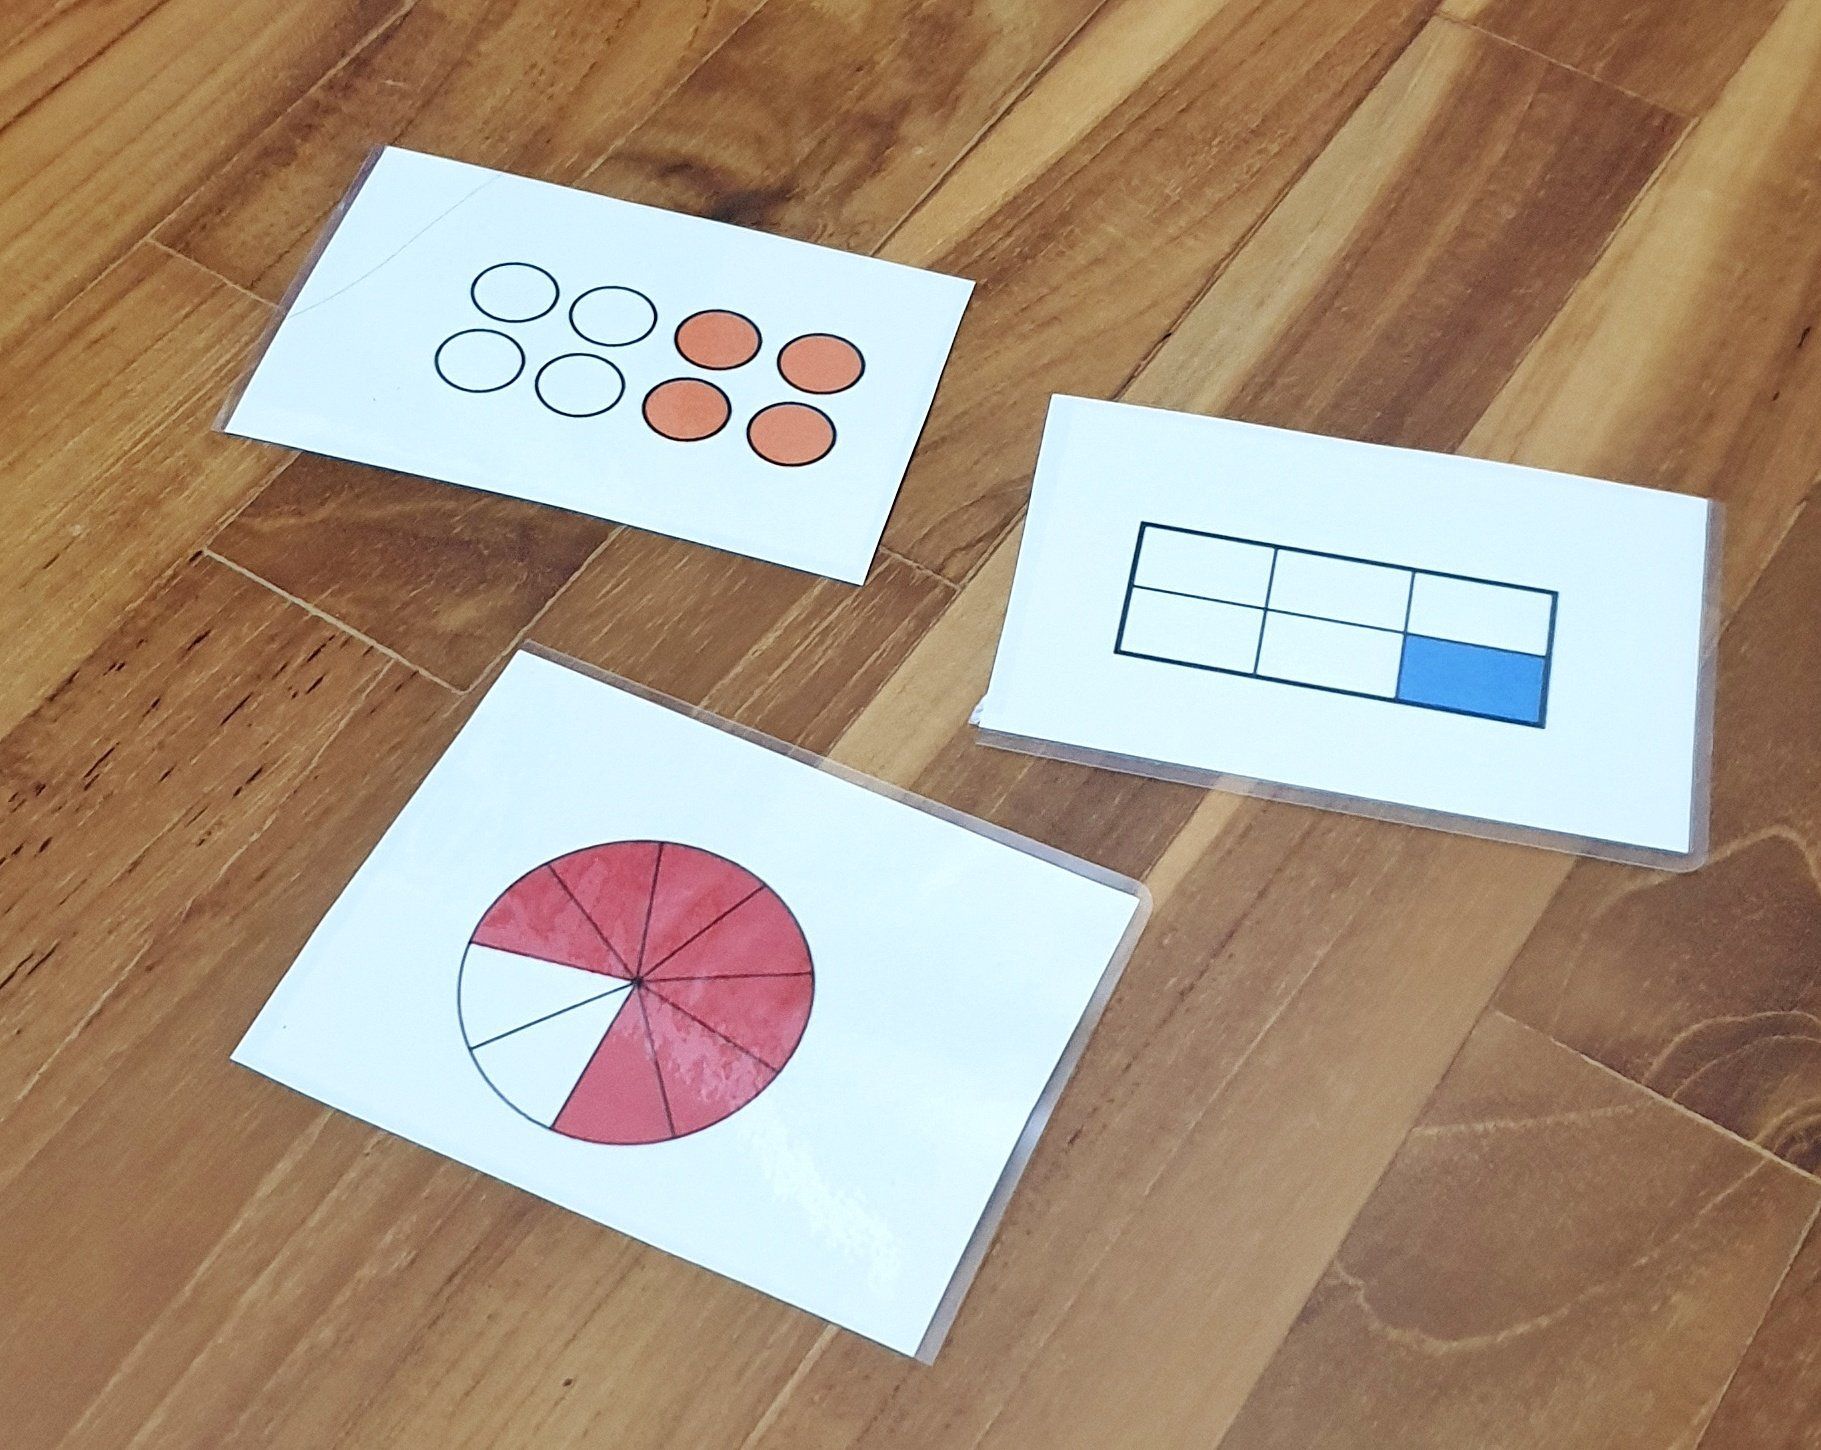 a-fun-way-to-learn-fractions-using-fraction-cards-my-chirpy-life